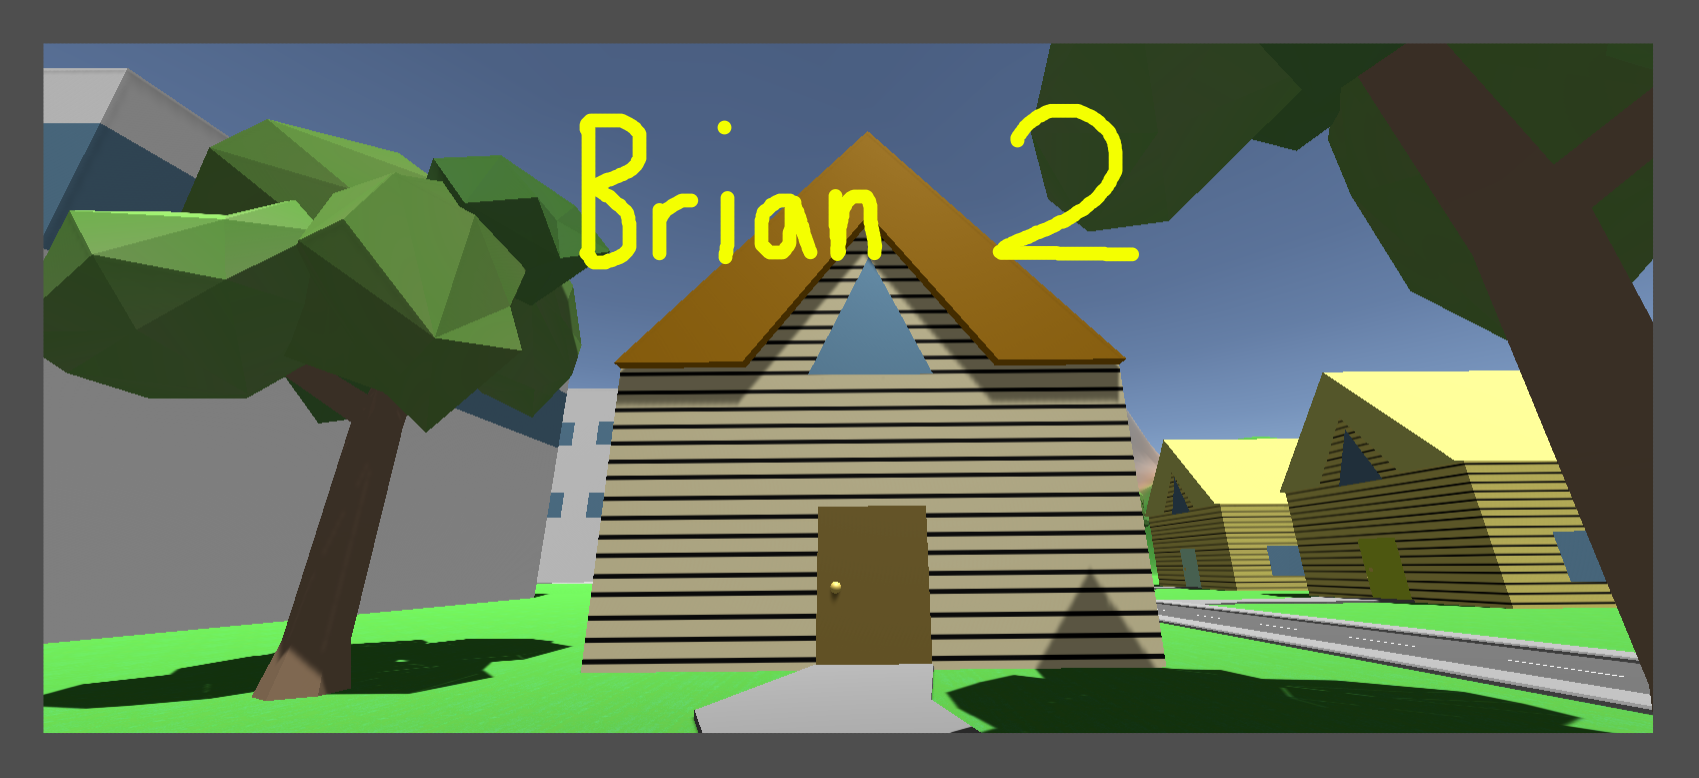 Brian 2 (Maybe unofficial)